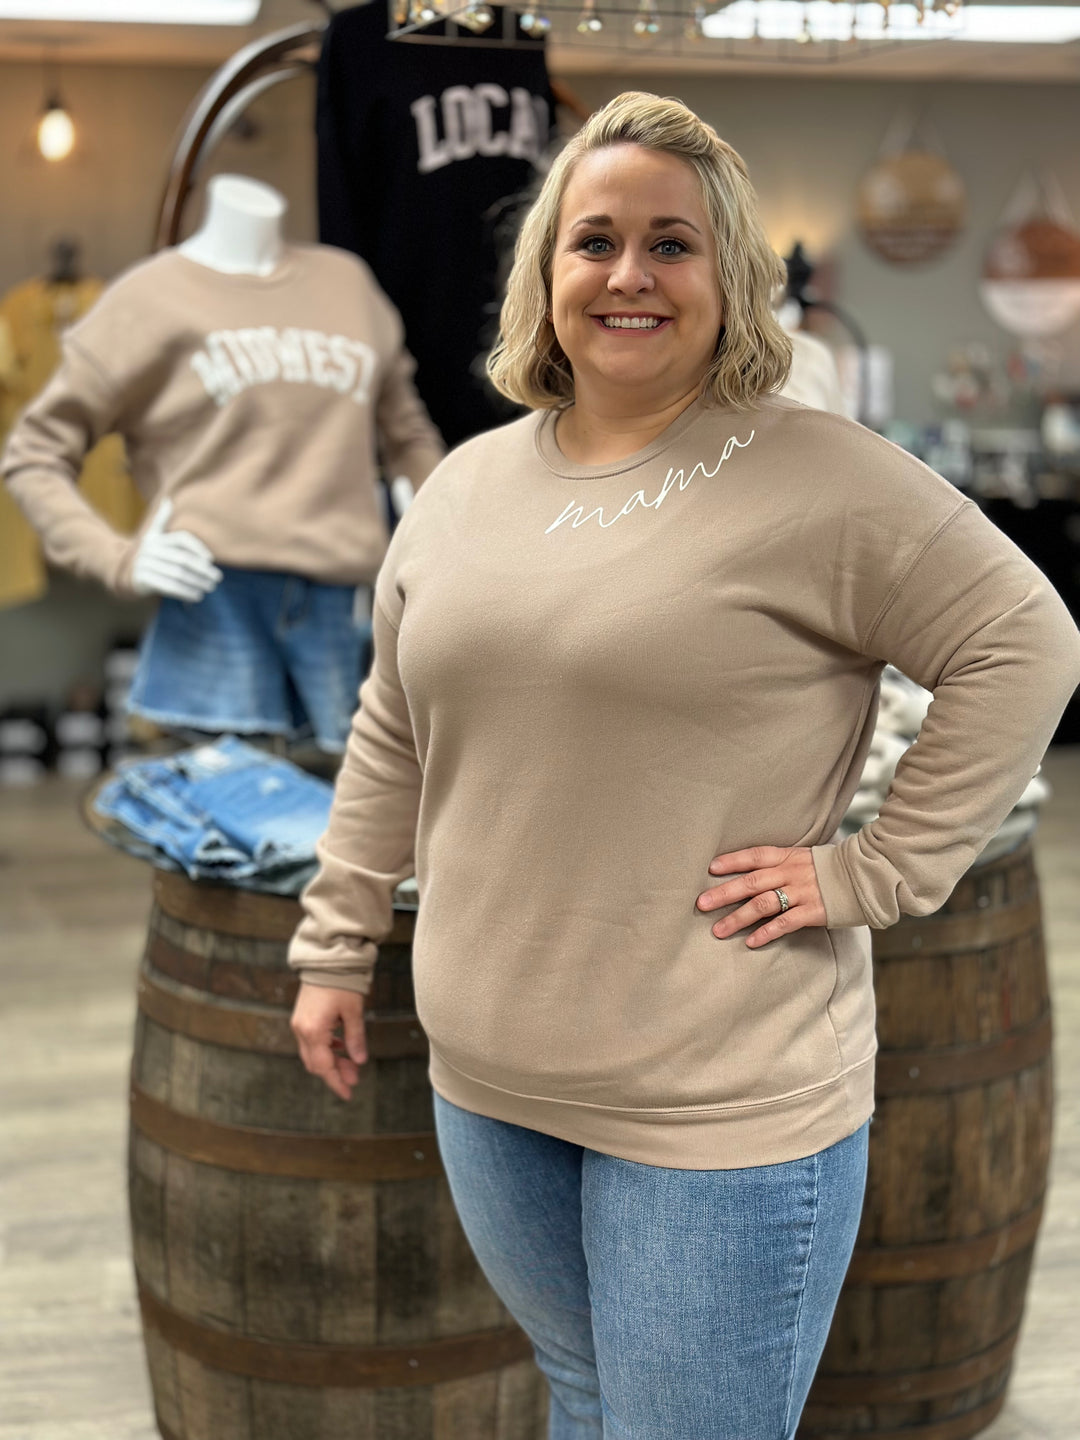 Mama Graphic Sweatshirt-Graphic Sweaters-Oat Collective-Evergreen Boutique, Women’s Fashion Boutique in Santa Claus, Indiana